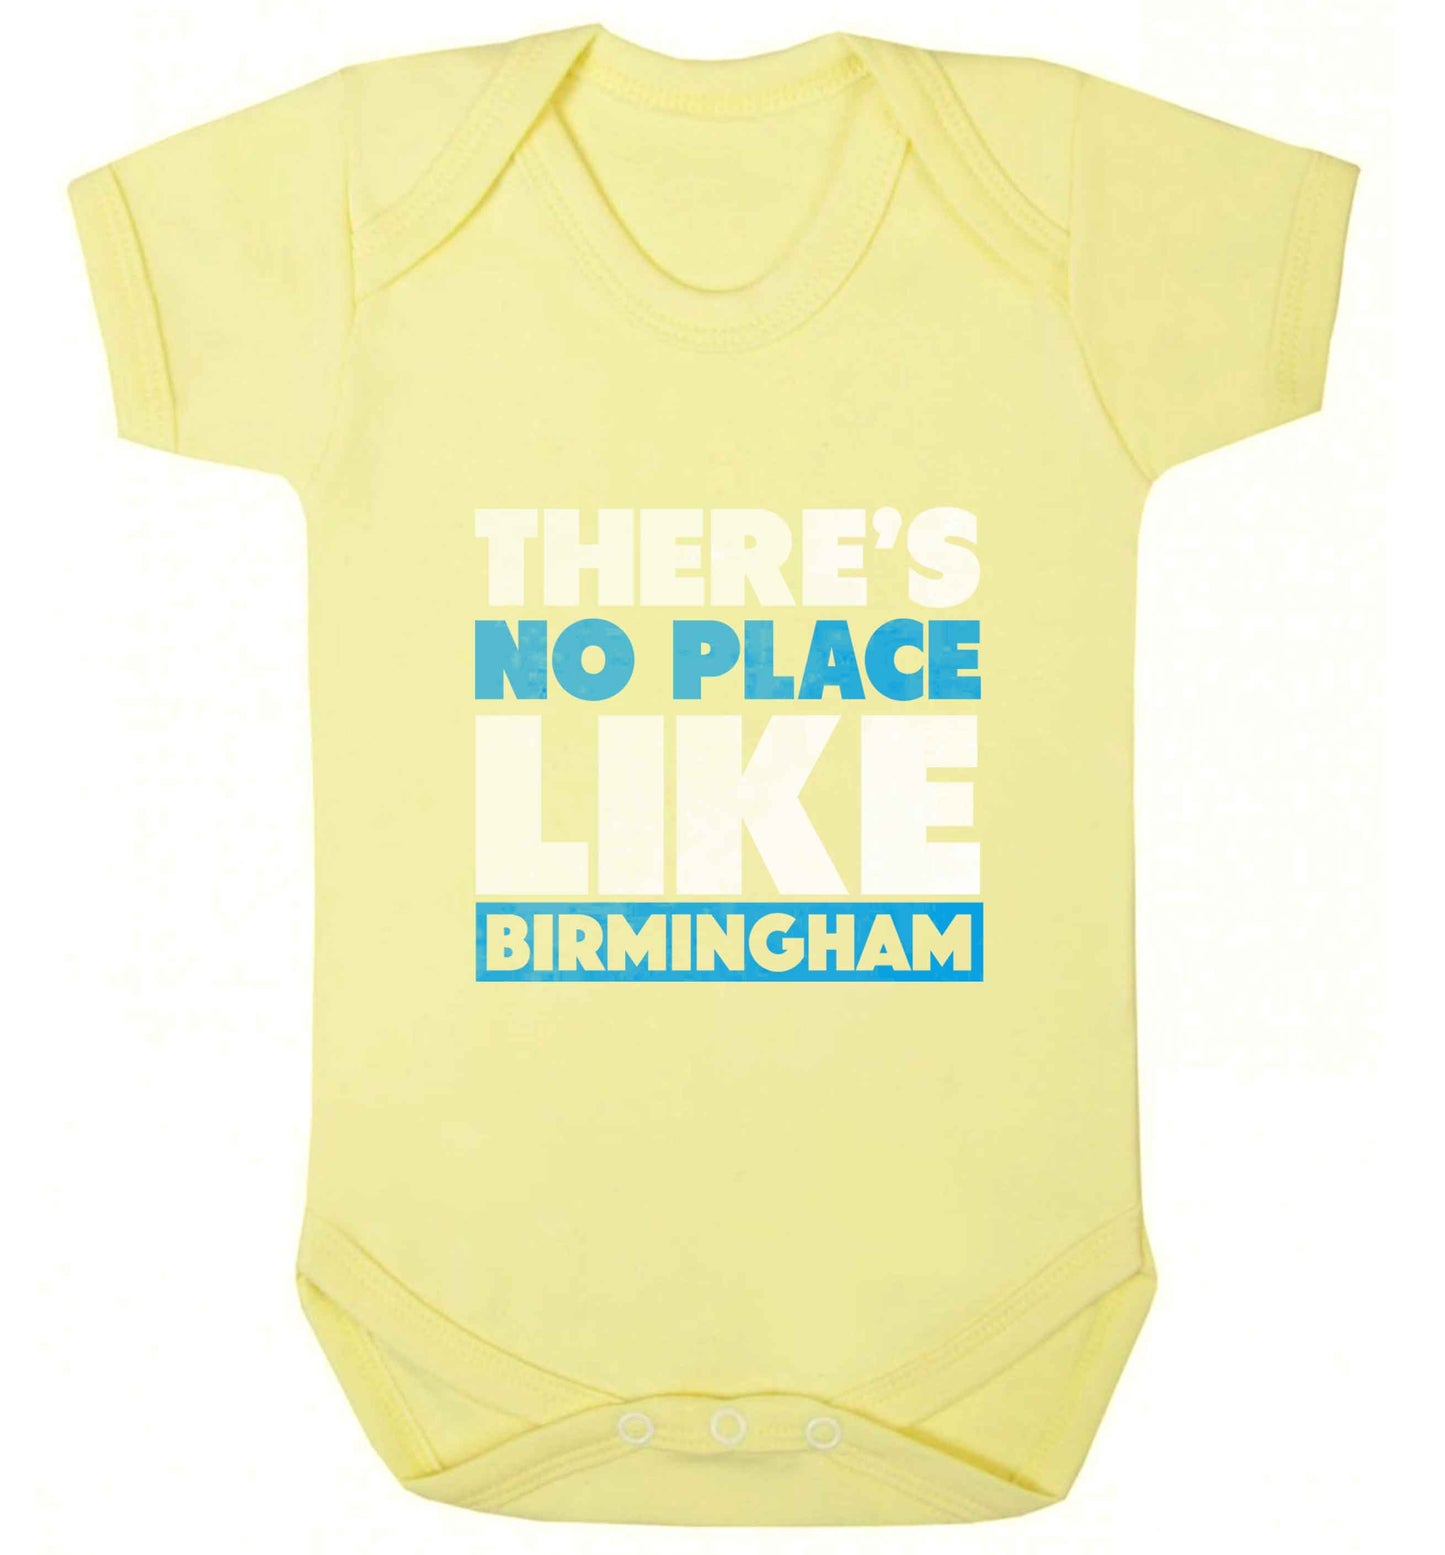 There's no place like Birmingham baby vest pale yellow 18-24 months